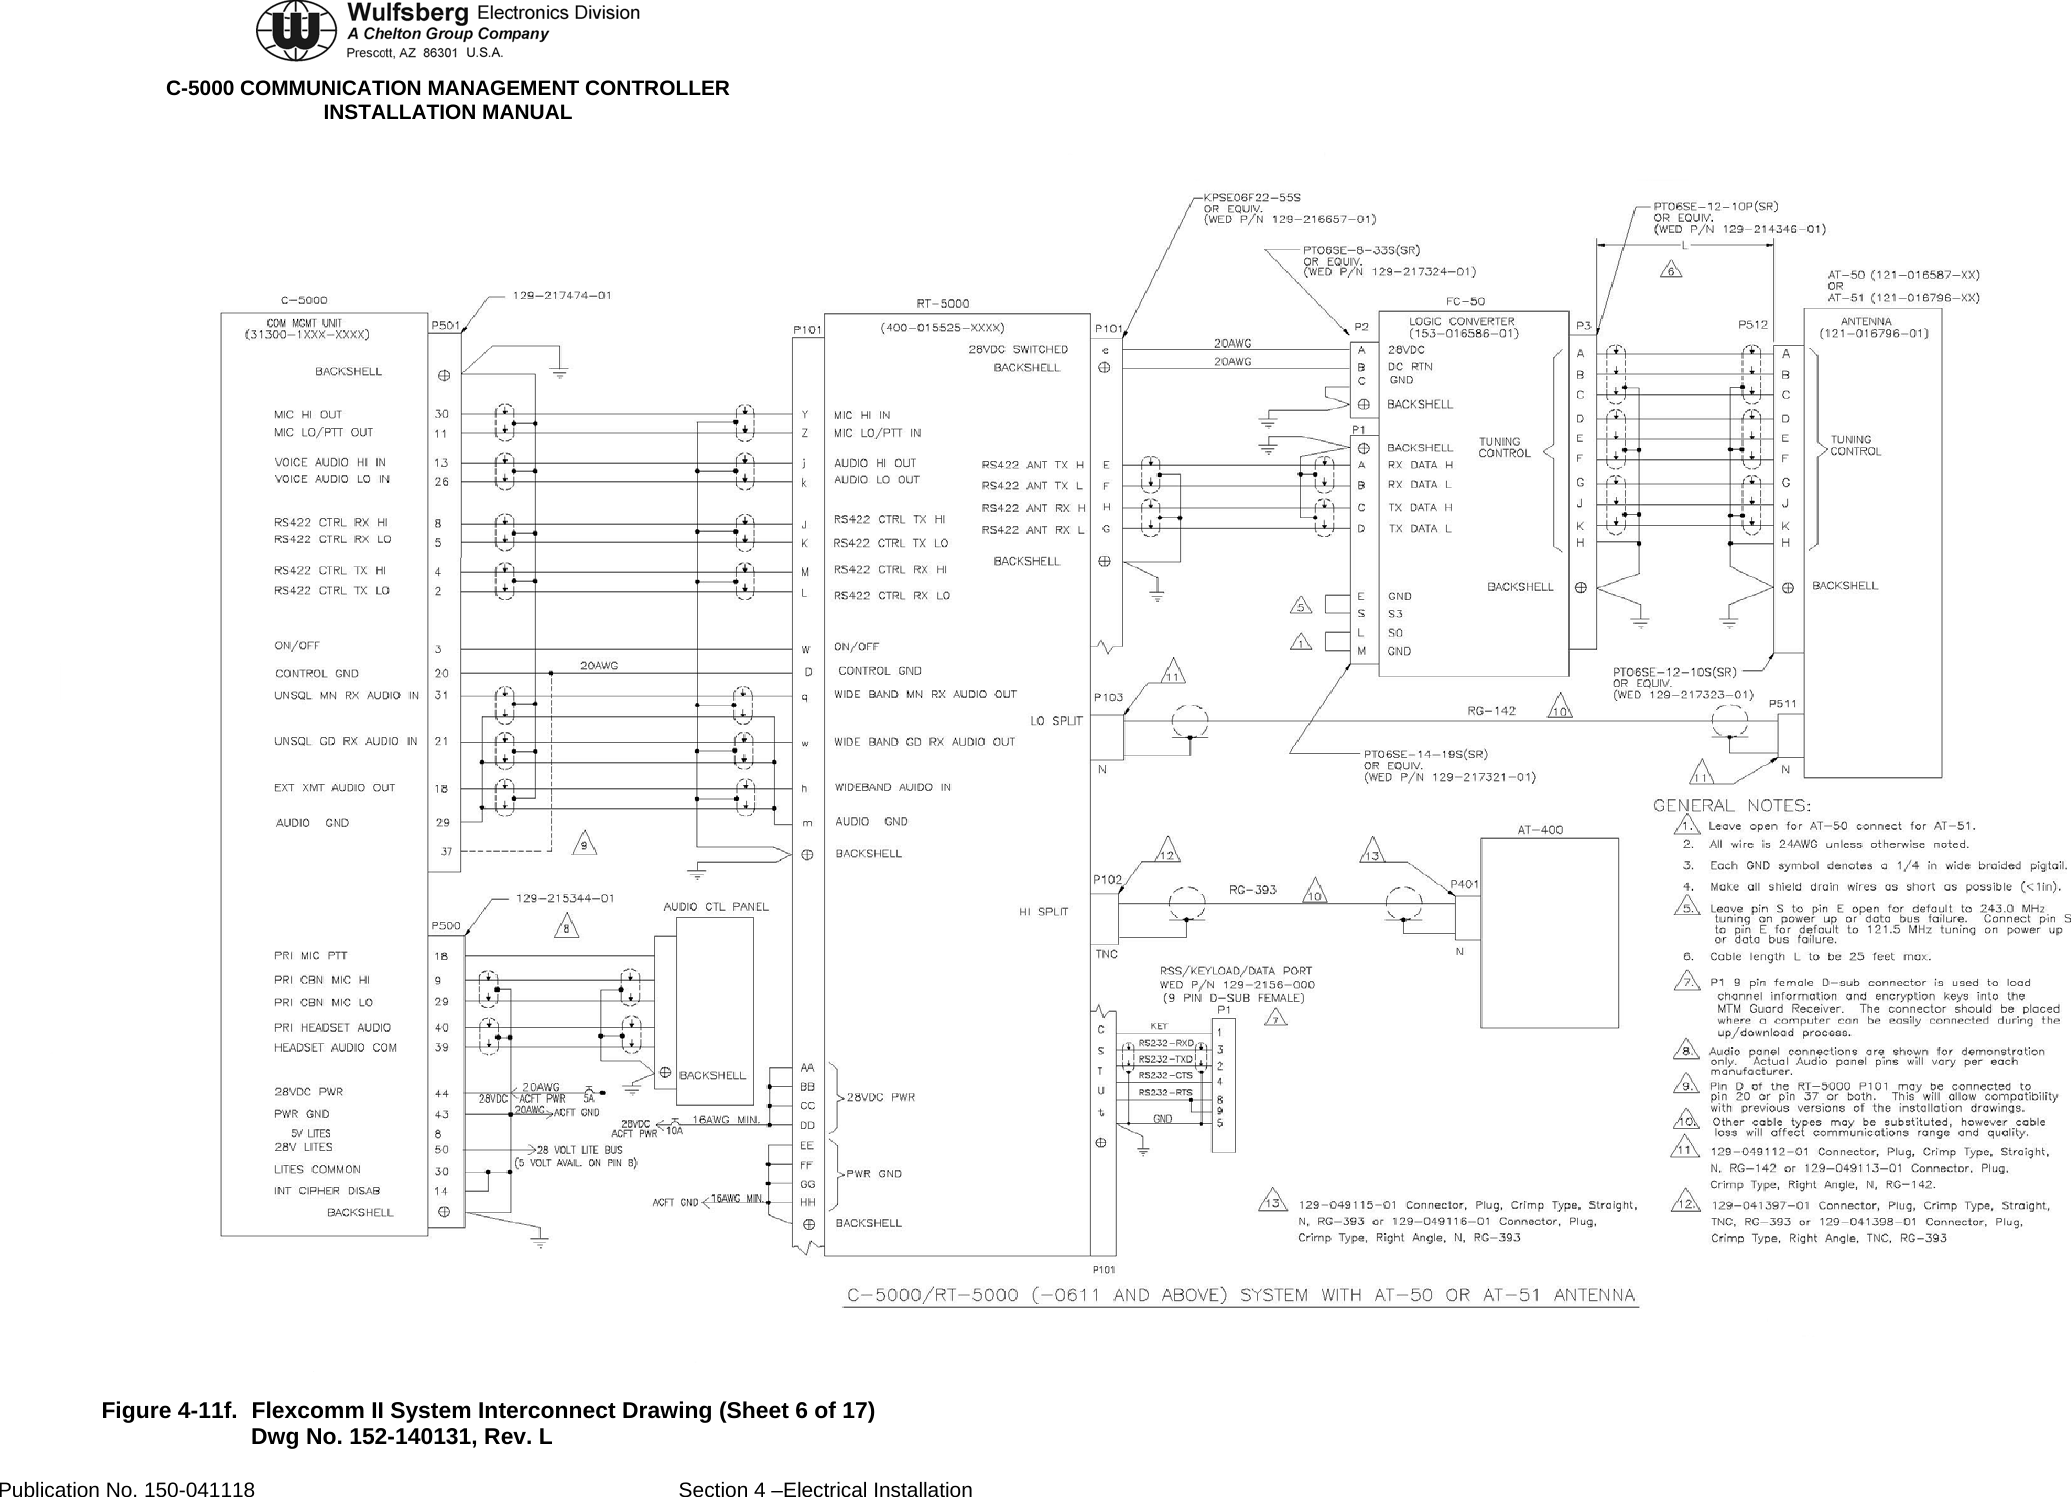  C-5000 COMMUNICATION MANAGEMENT CONTROLLER INSTALLATION MANUAL  Figure 4-11f.  Flexcomm II System Interconnect Drawing (Sheet 6 of 17) Dwg No. 152-140131, Rev. L Publication No. 150-041118  Section 4 –Electrical Installation 